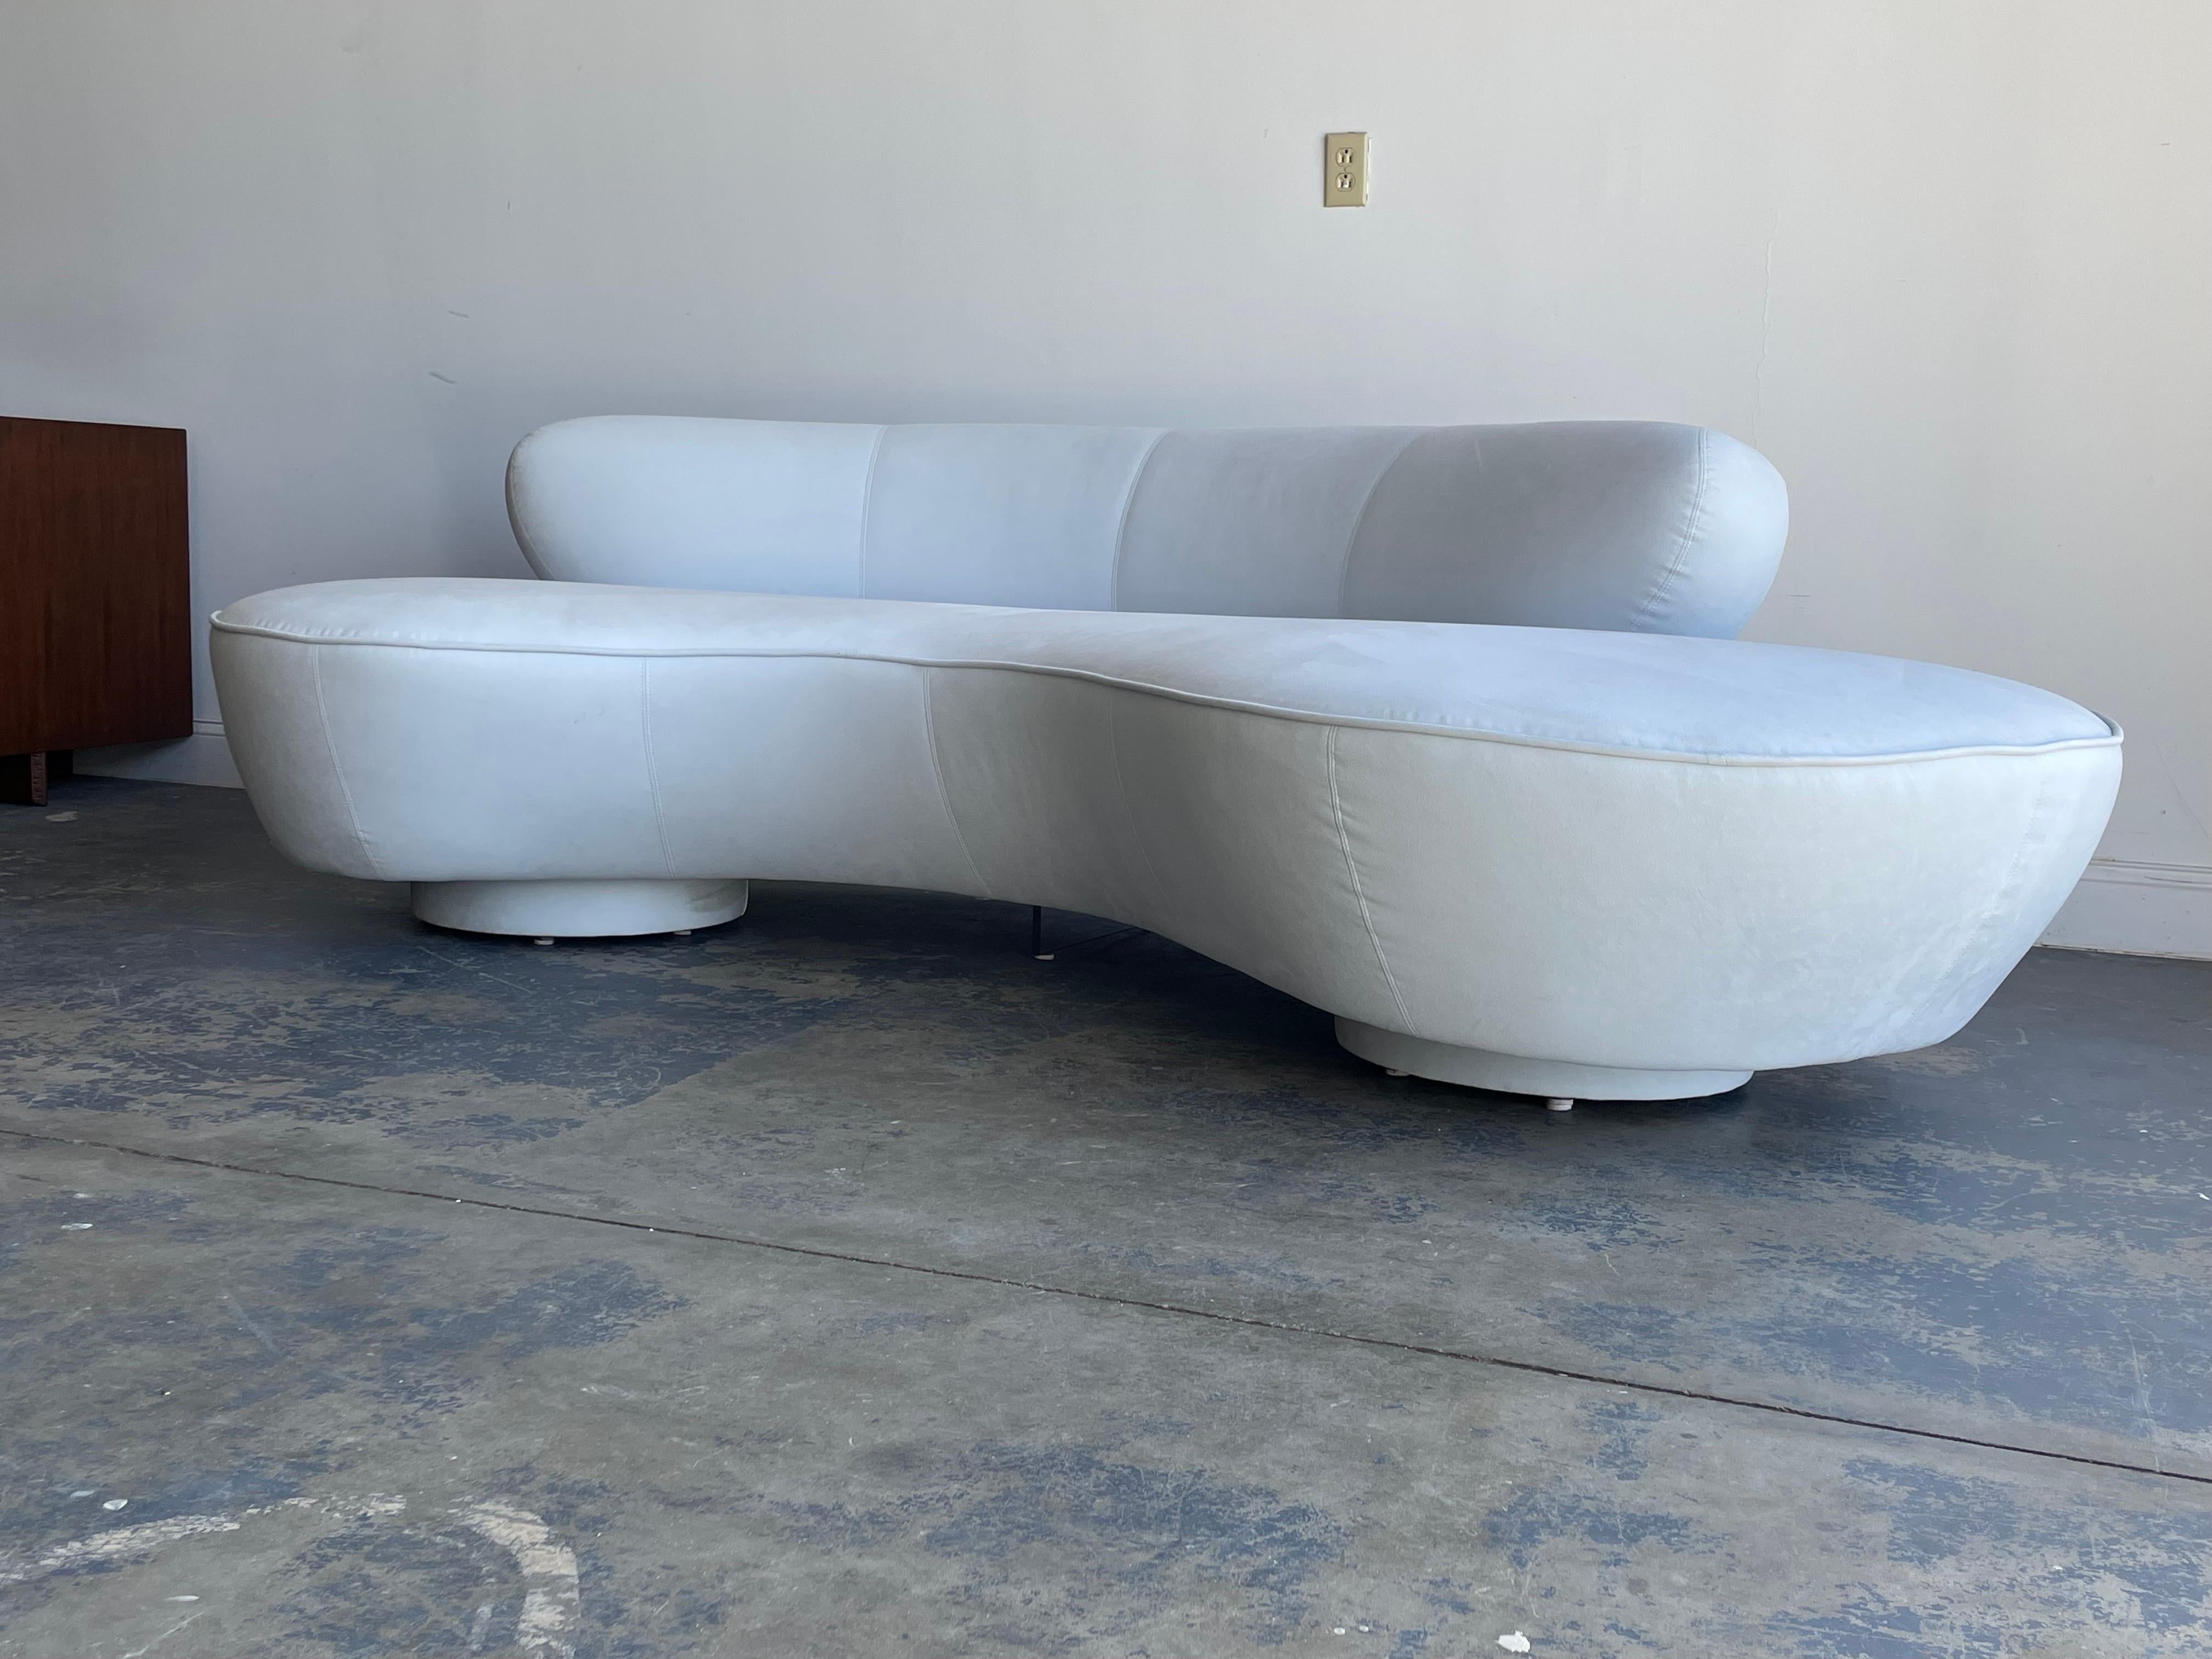 A classic sofa designed by Vladimir Kagan for Directional. Features a very light off white with blue hue microsuede upholstery, above two round pedestal bases and a lucite center support. Great organic design in an uncommon color. 

Sofa was